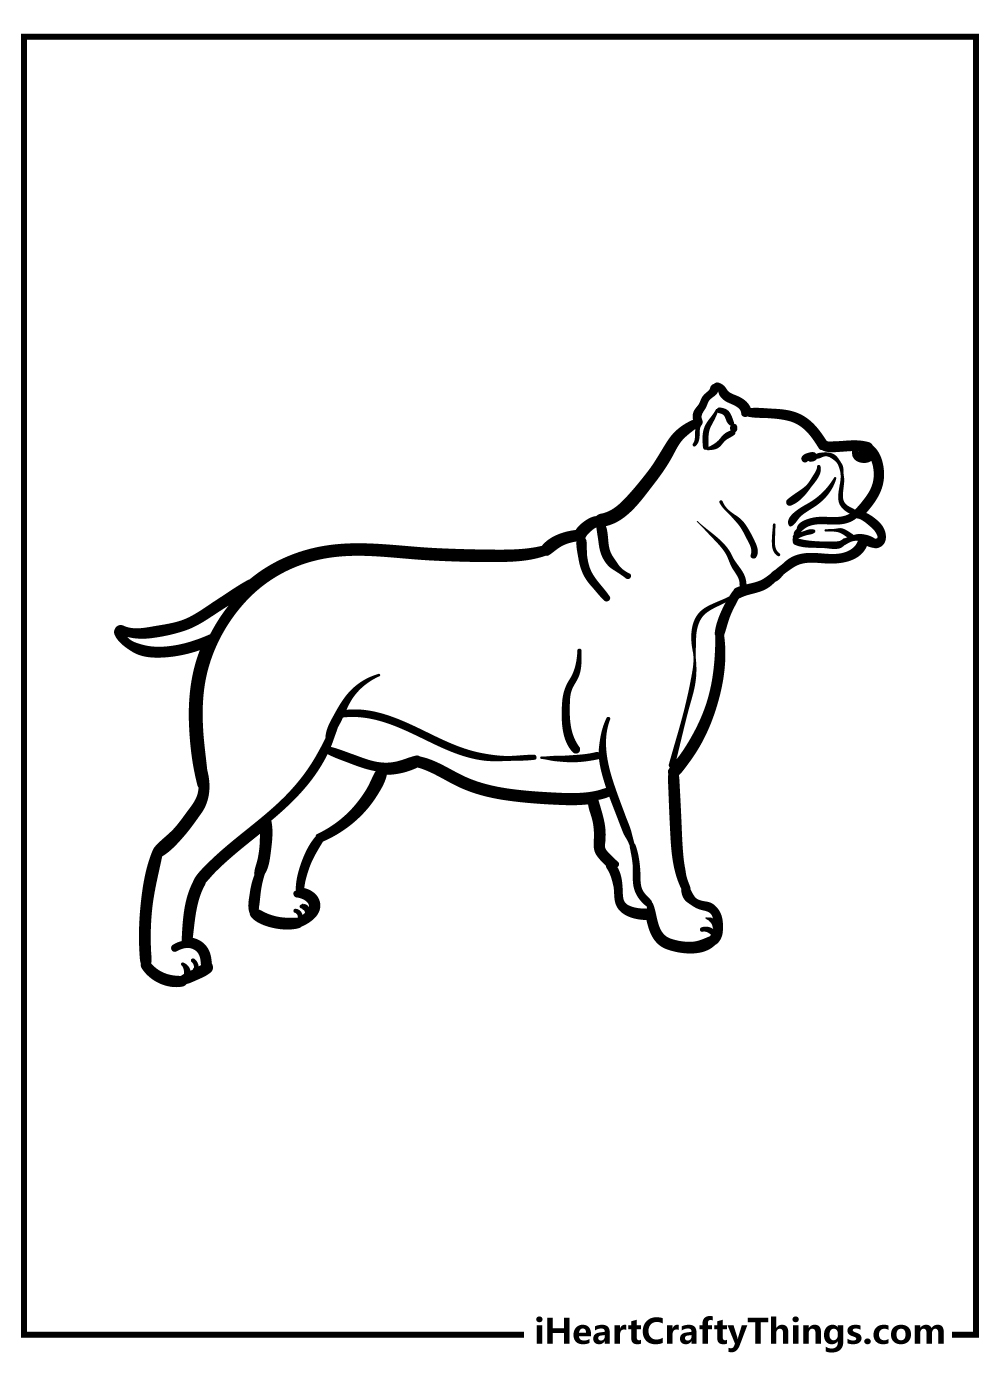 Pitbull Coloring Pages for adults free printable